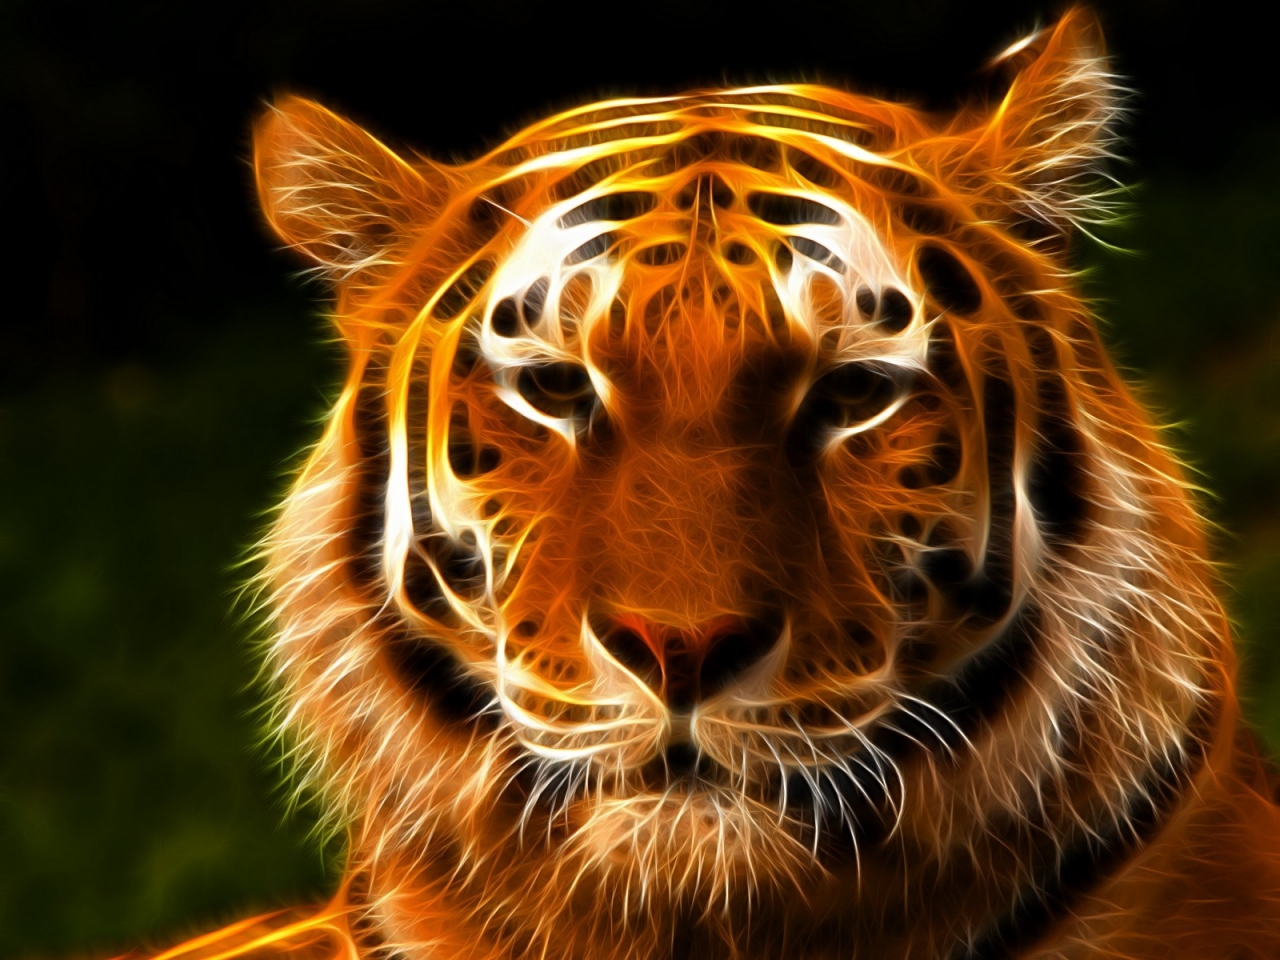 Tiger Face Art for 1280 x 960 resolution